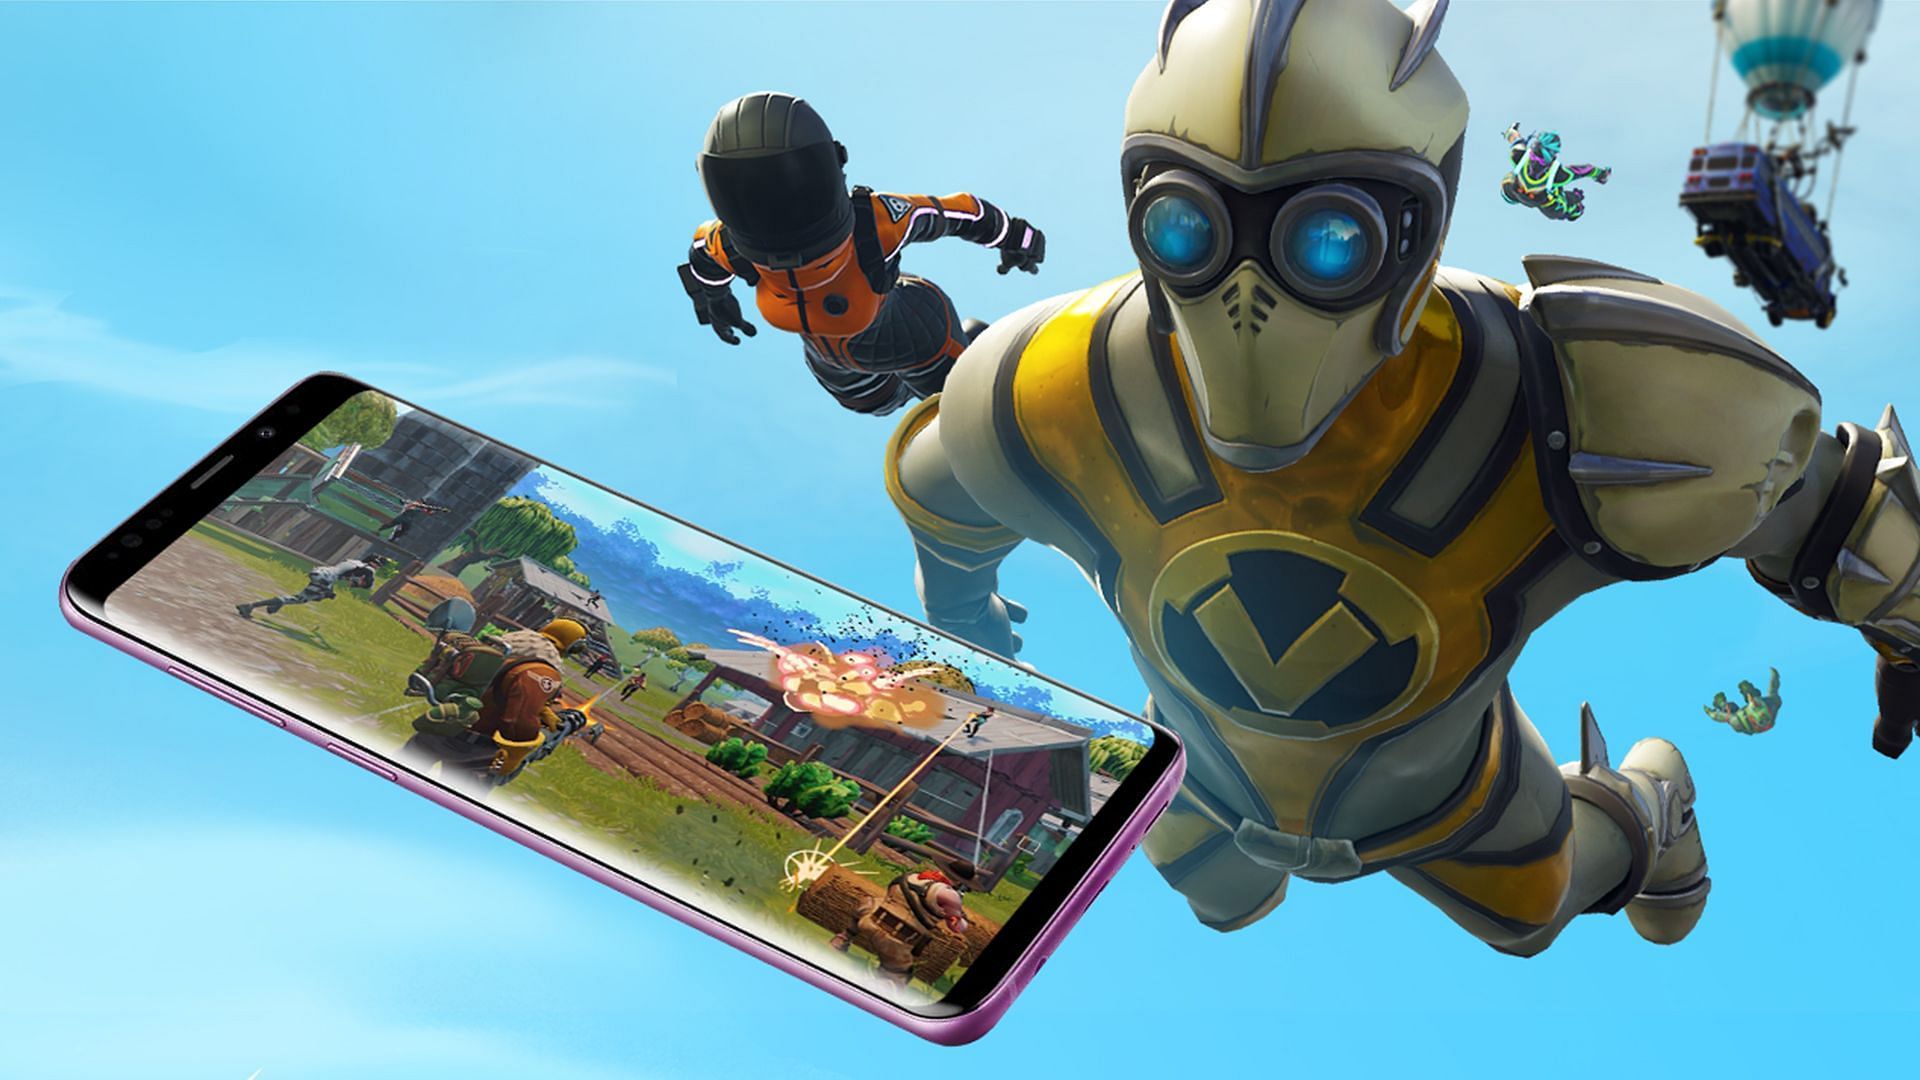 The lawsuit against Apple was one of the biggest Fortnite controversies (Image via Epic Games)